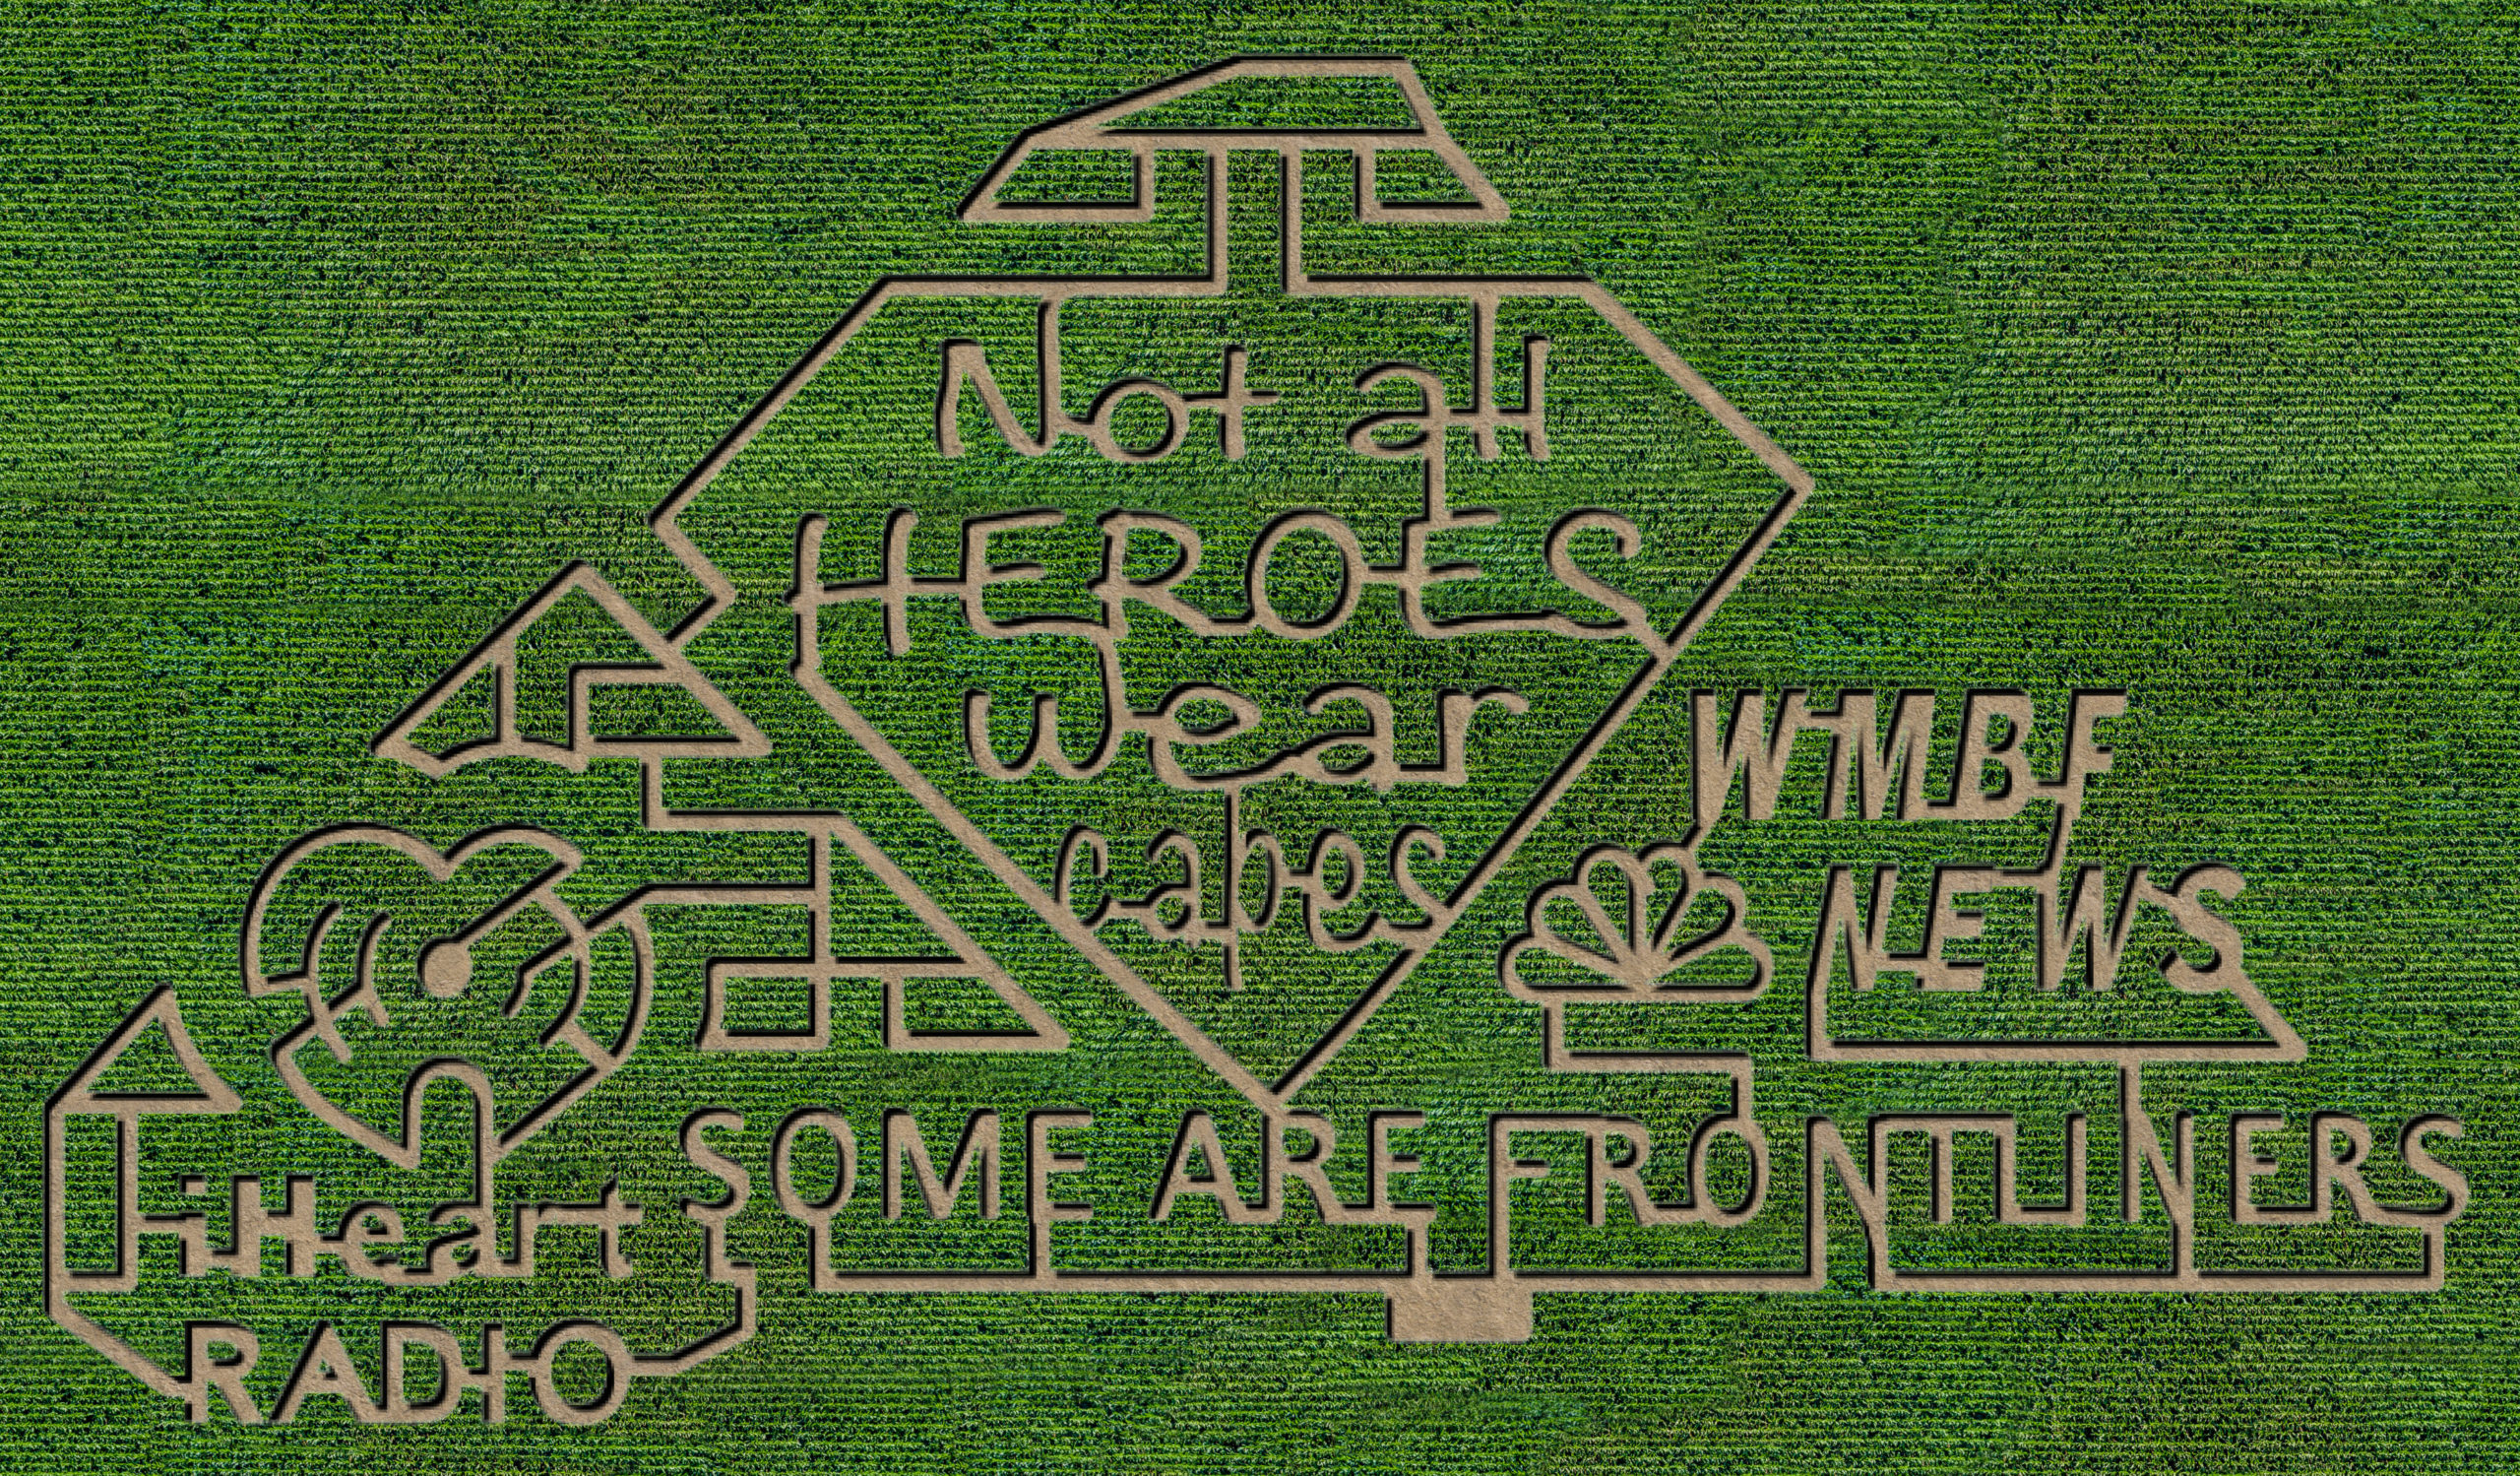 A corn maze with some kind of message written on it.